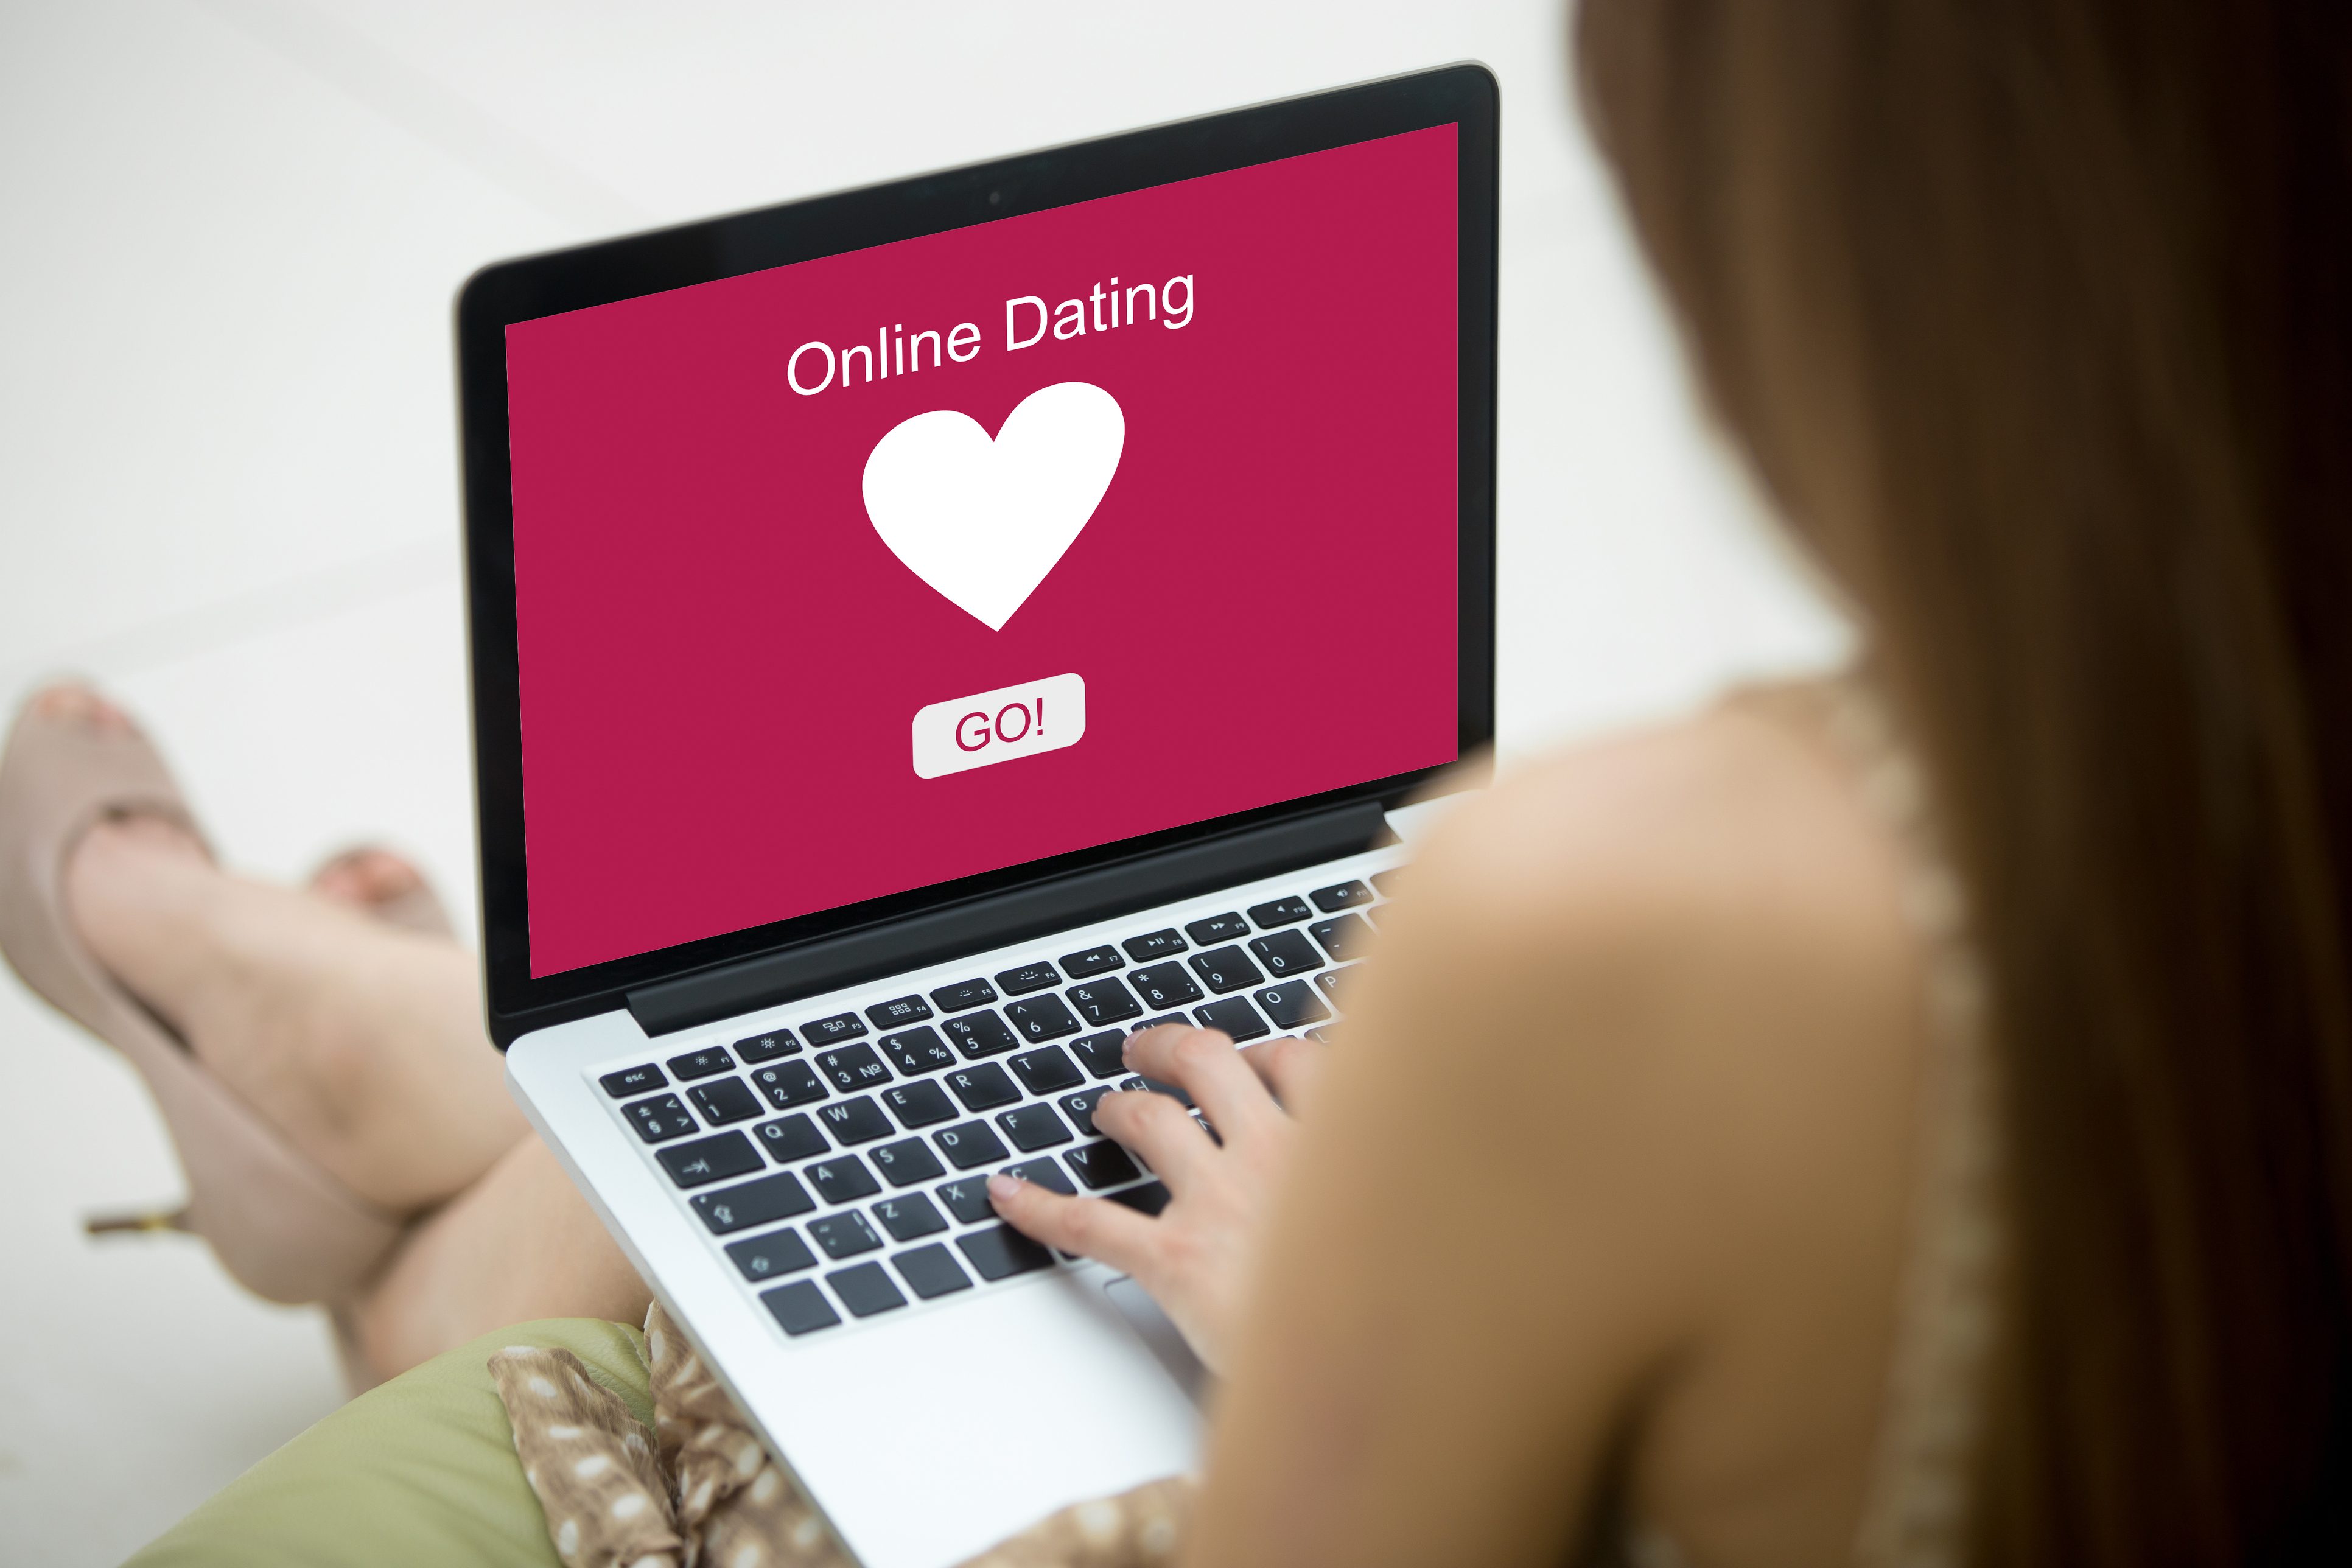 Am I In The Right Situation To Try Joining Online Dating Websites?